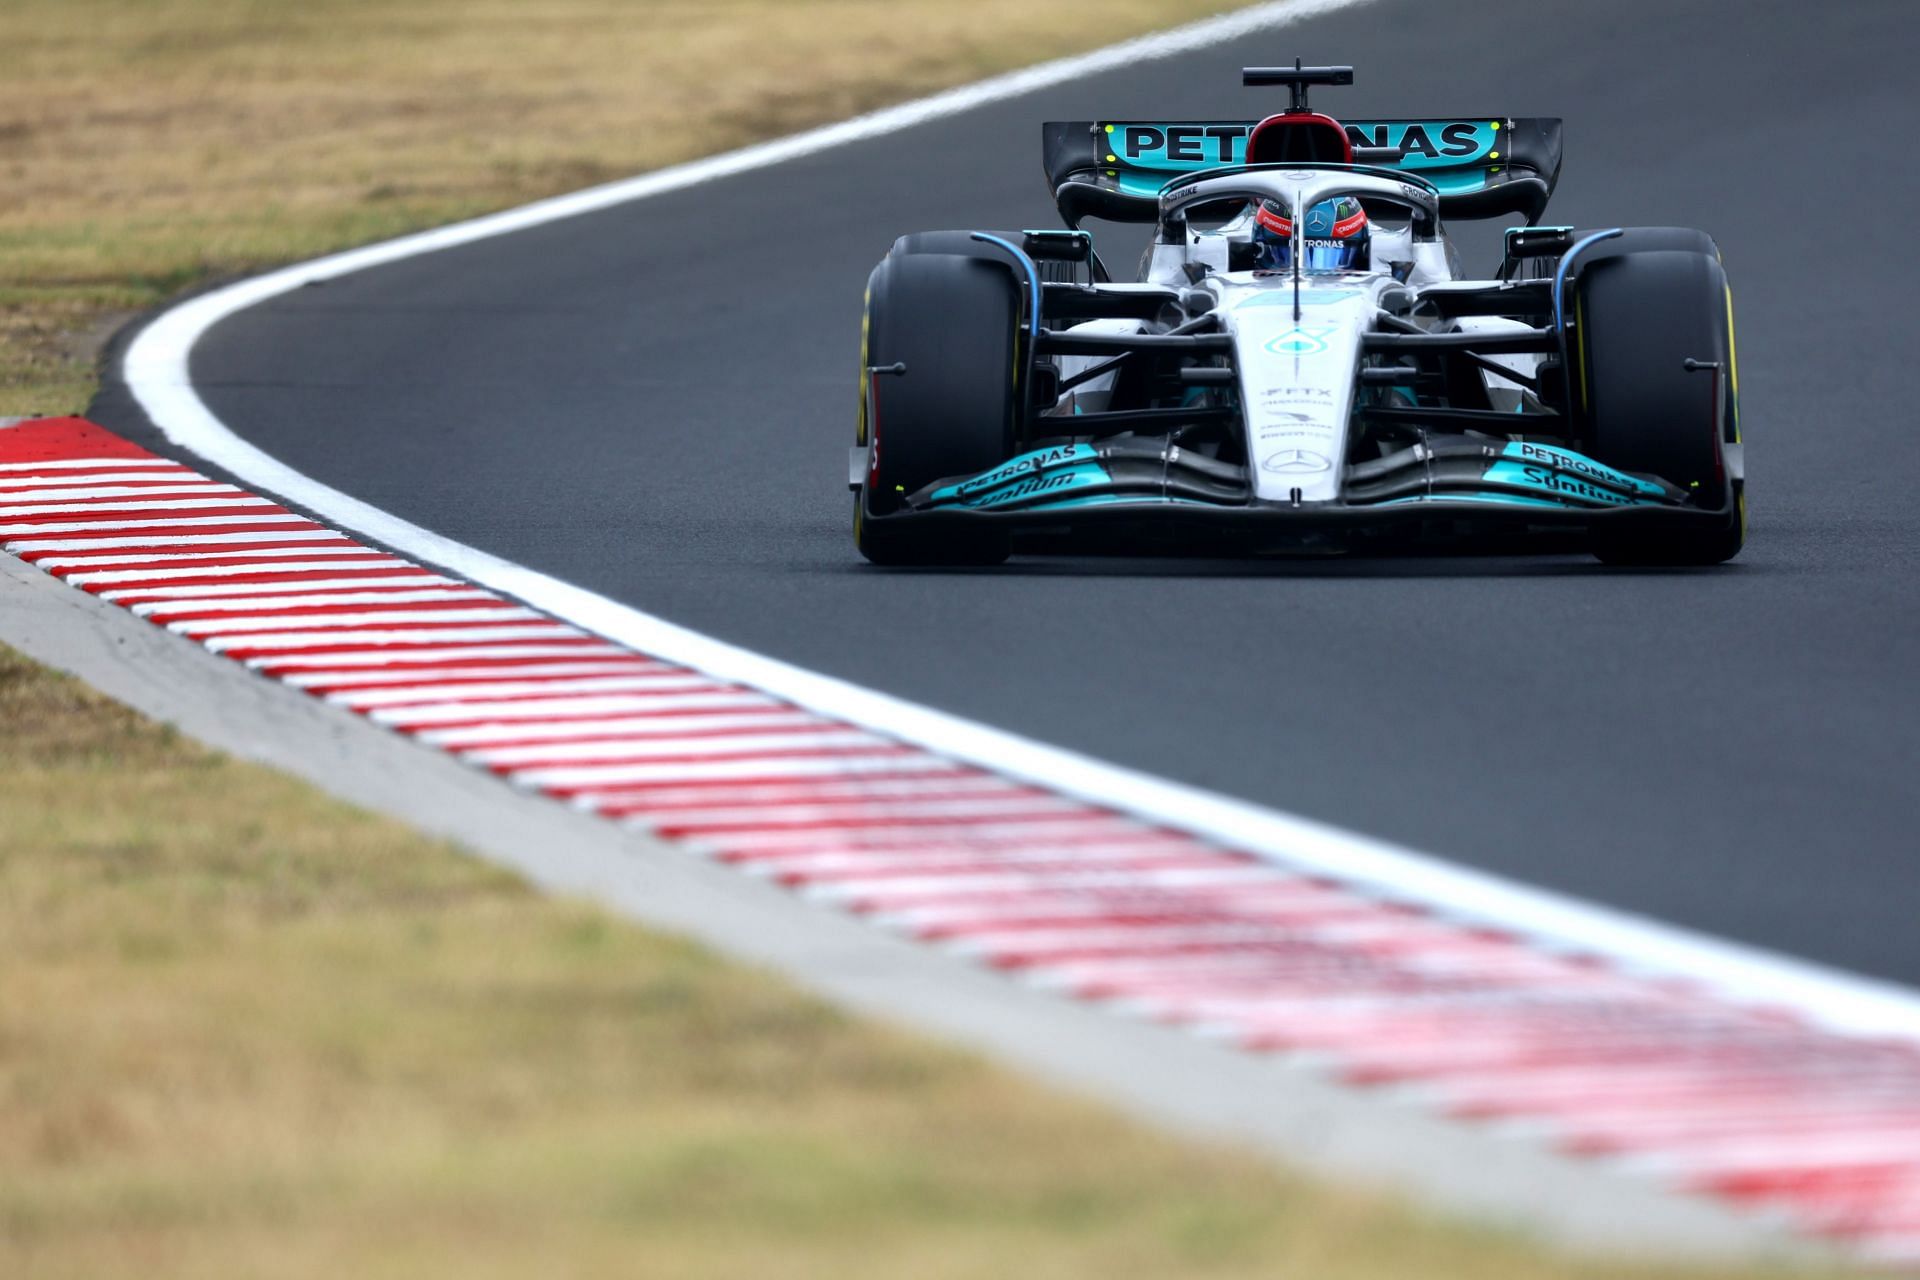 Mercedes claims that the team has resolved the bouncing issue with the car